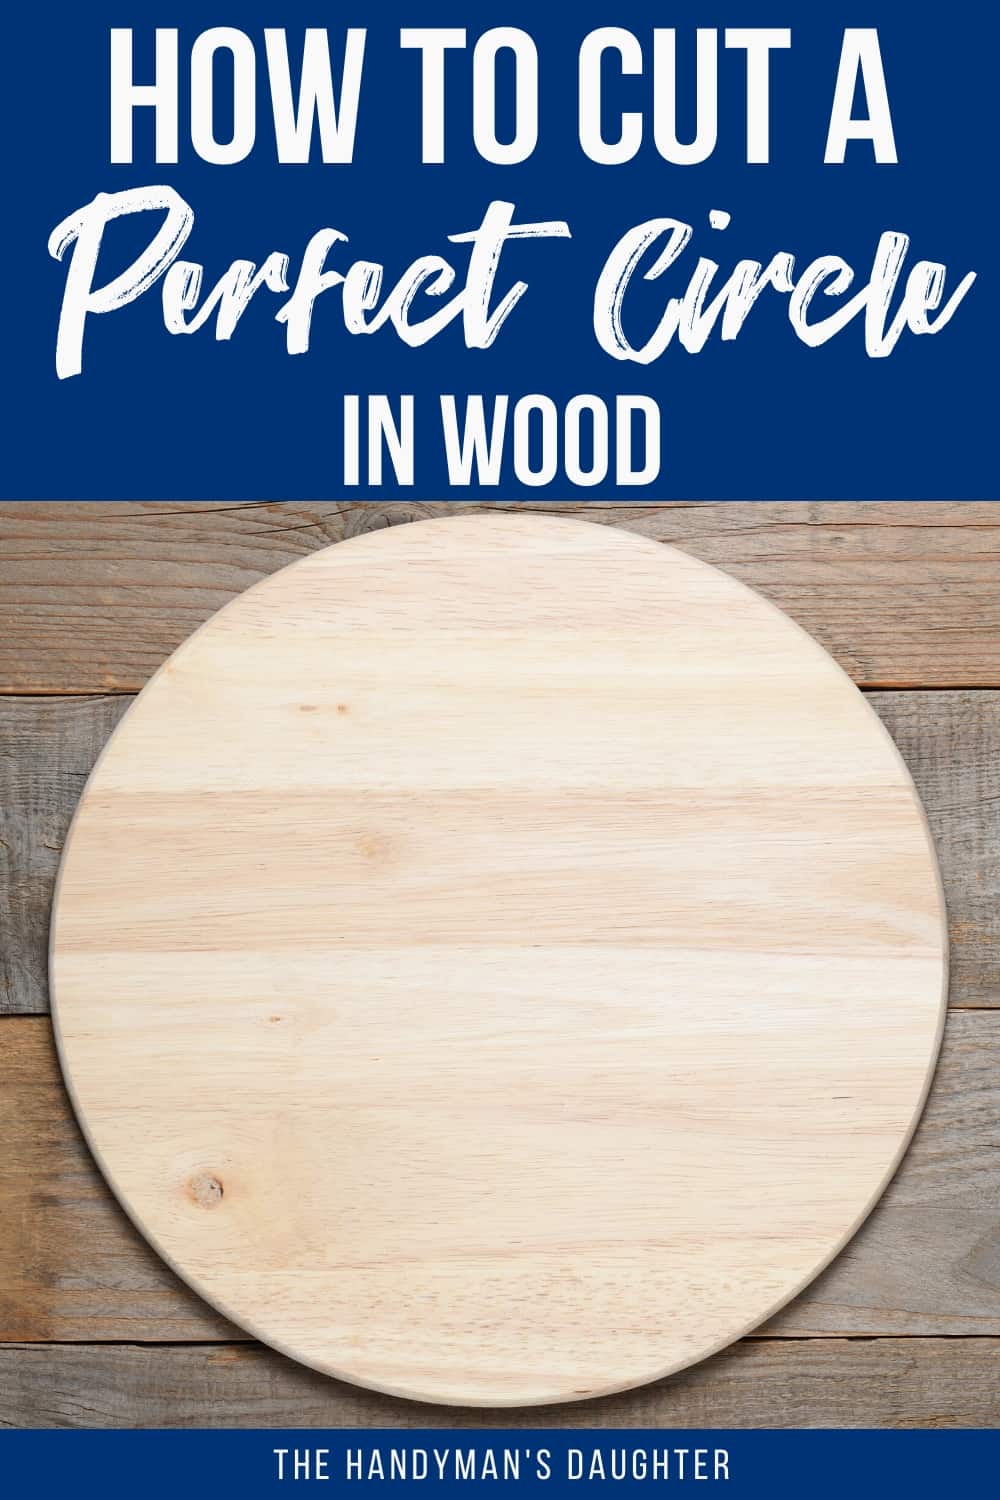 How to cut a circle in wood